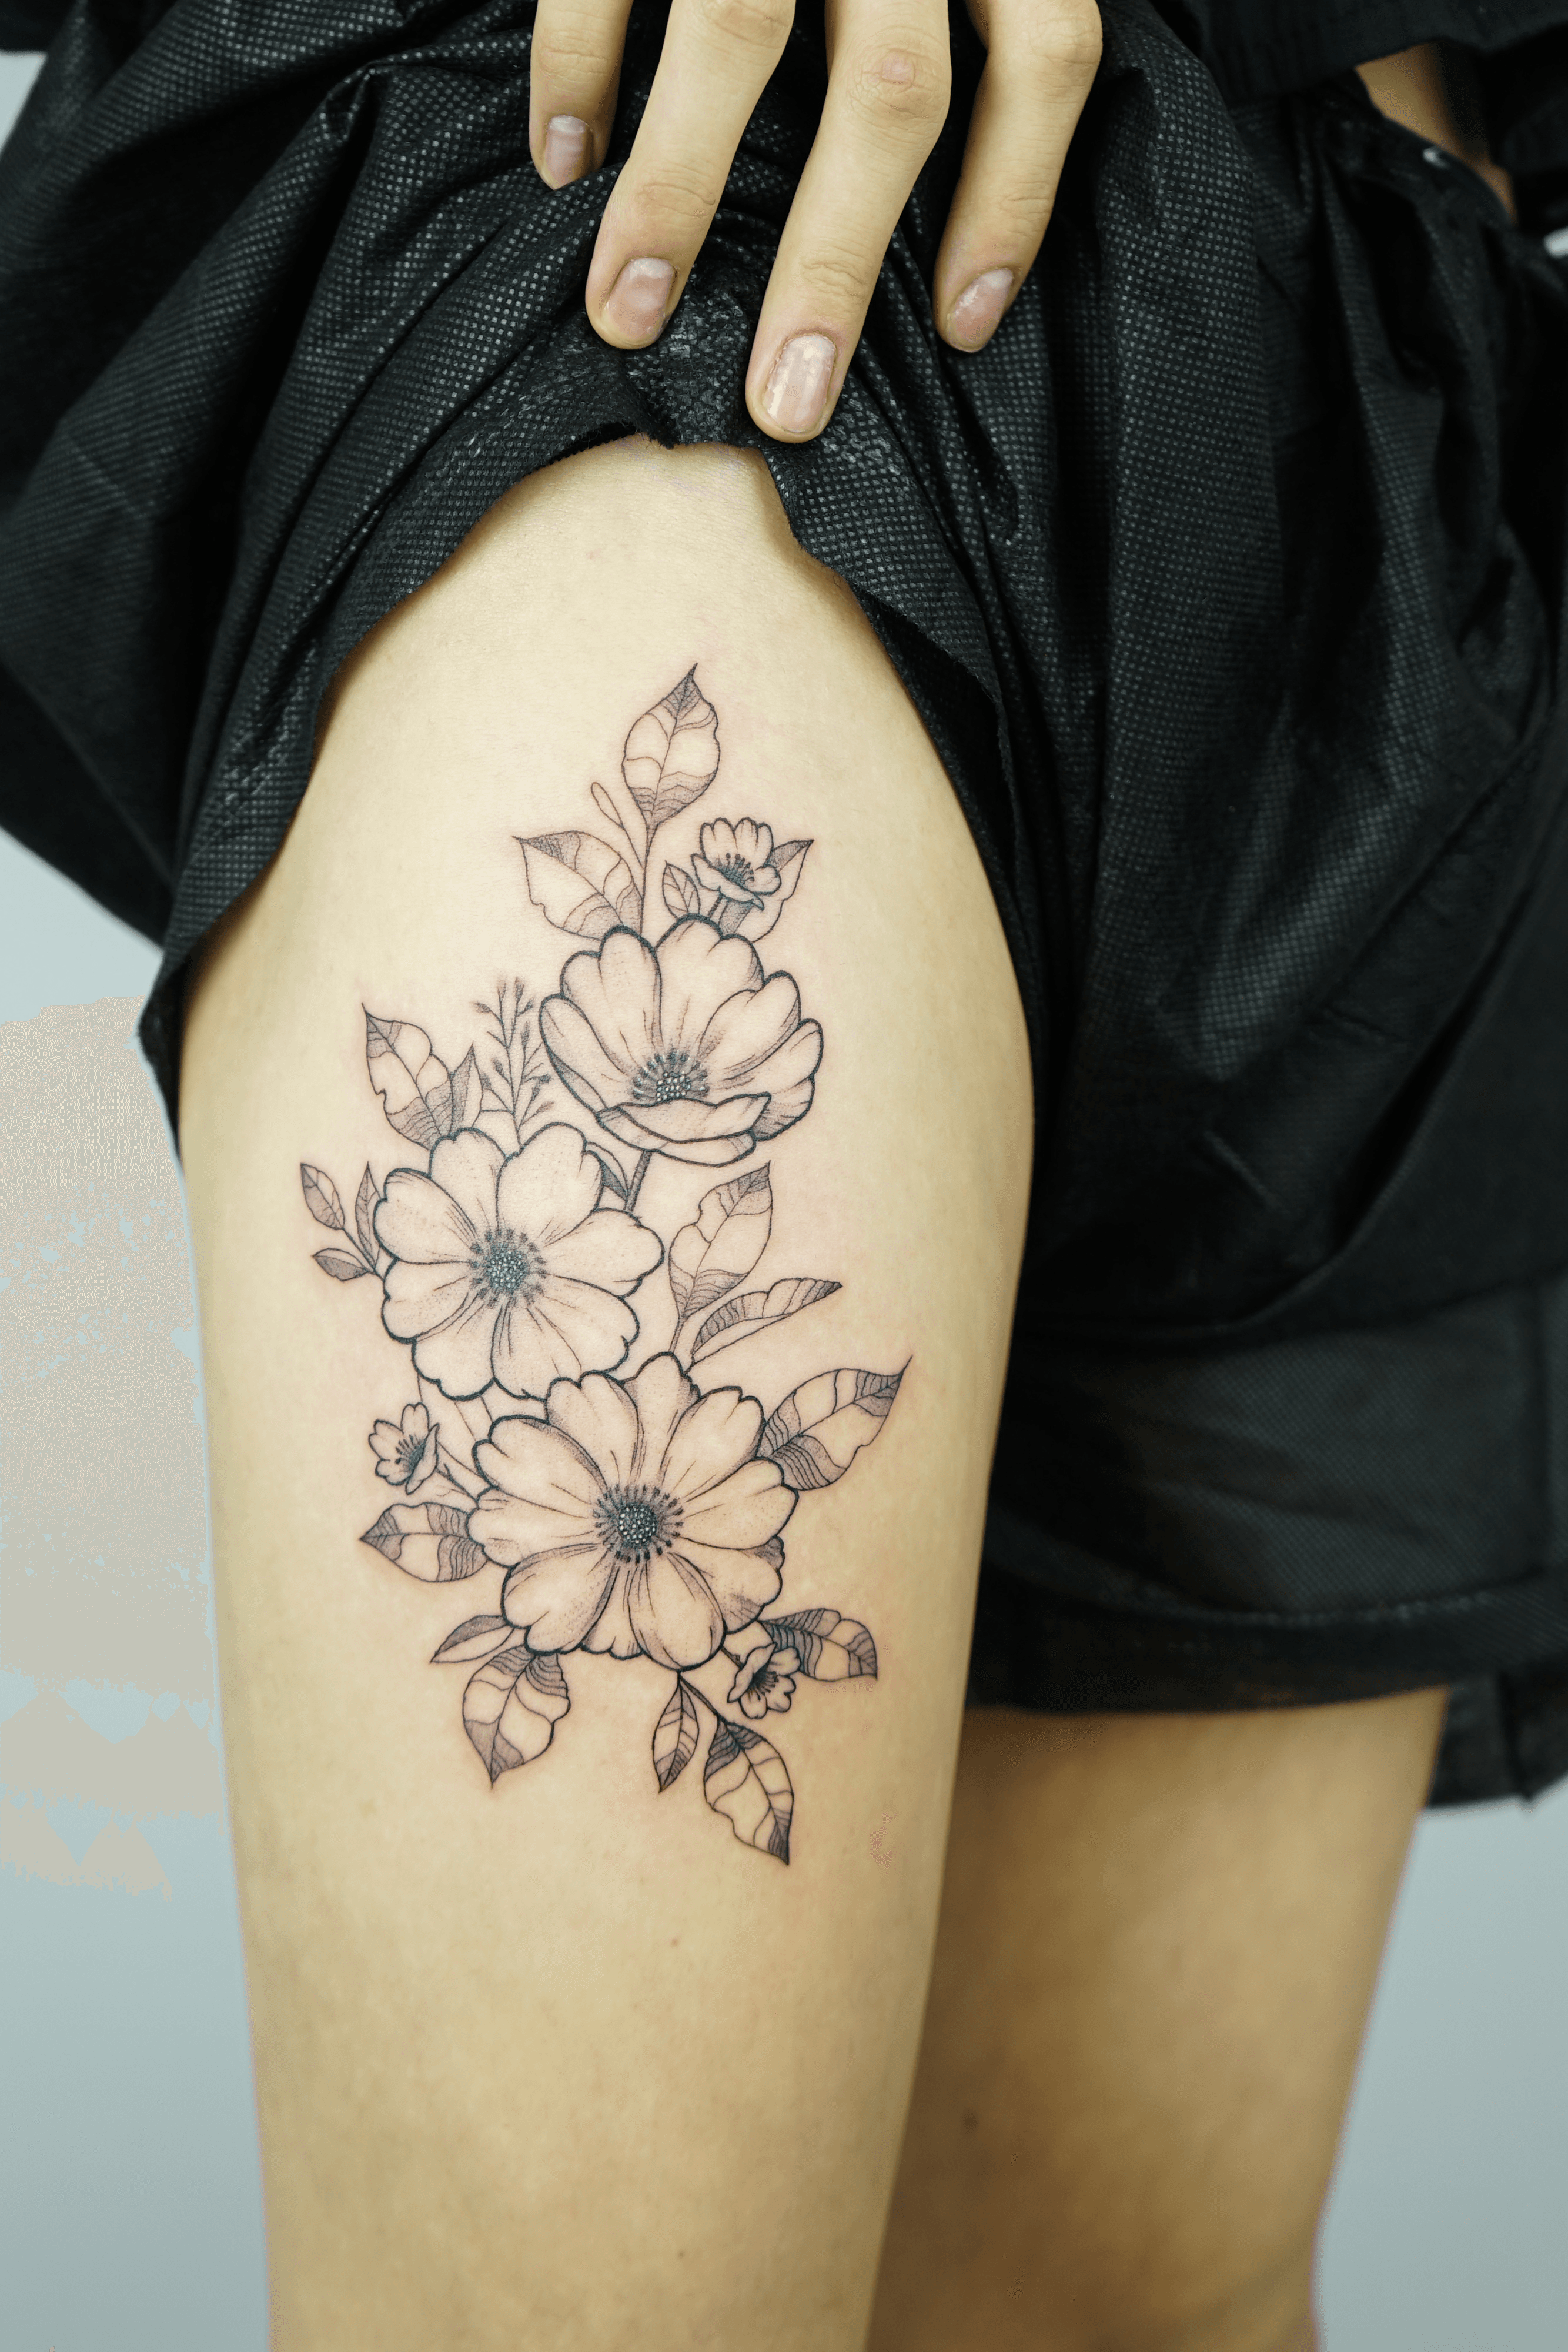 Guilherme Pantoja on Twitter Tattoo Design I did for a client it  includes anemones poison sumac and Hawthorn flowers   gardening  botany tattoodesign tattooideas flowertattoo anemone  botanicillustration gardendecor httpstco 